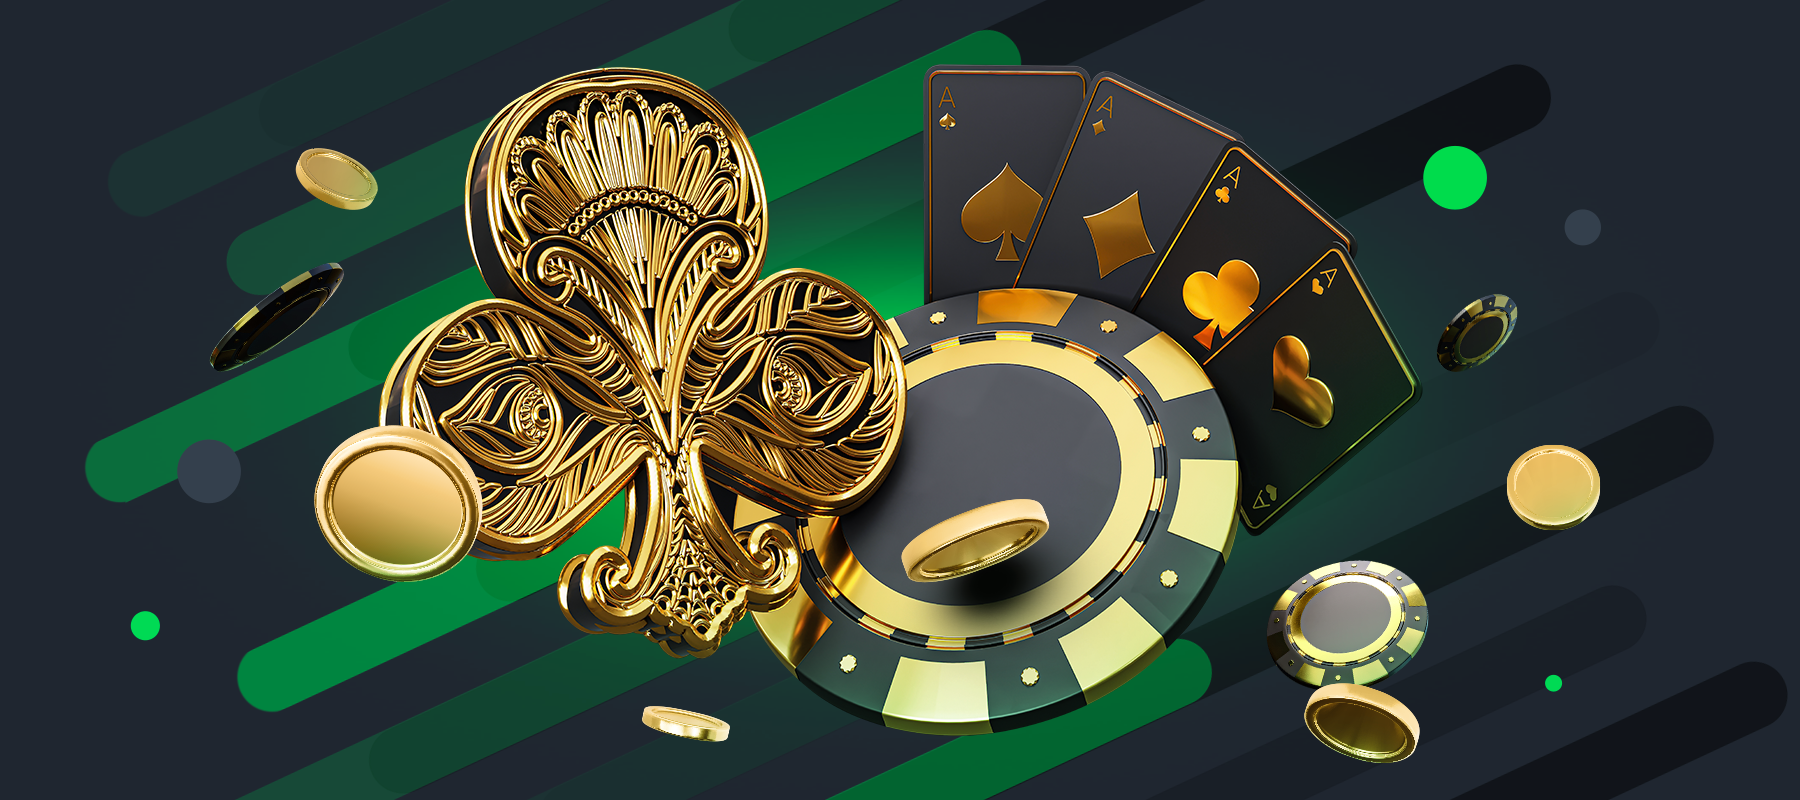 Grab Your Free Chips in October Daily Live Casino Challenges!